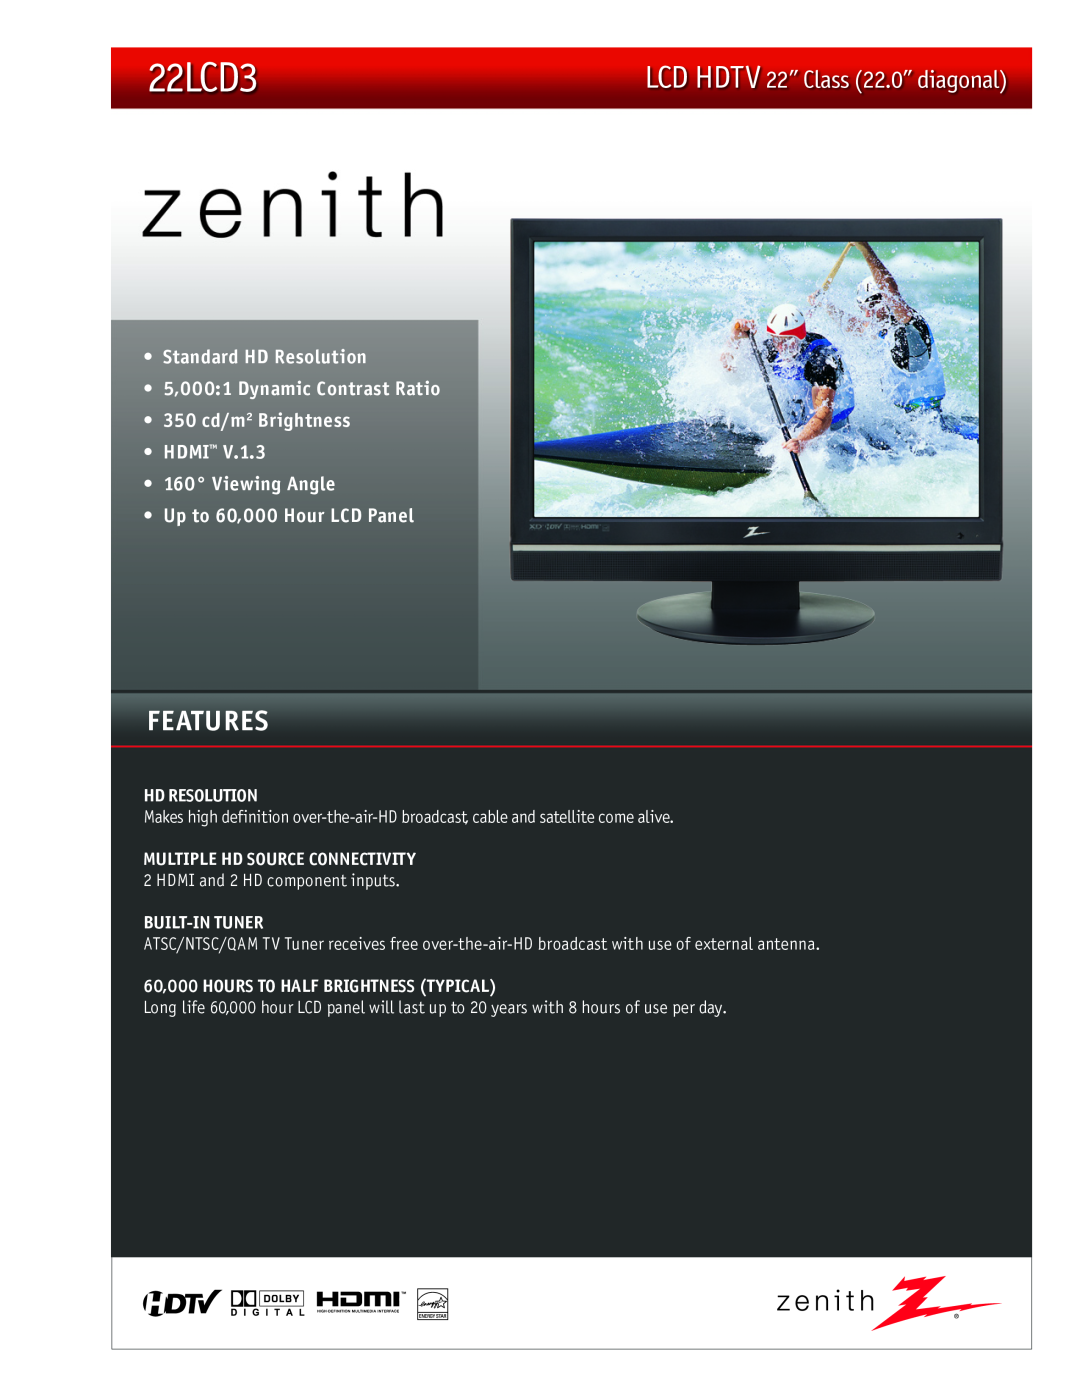 Zenith 22LCD3 manual HD Resolution, Built-In Tuner, 60,000 HOURS TO HALF BRIGHTNESS TYPICAL, Features 